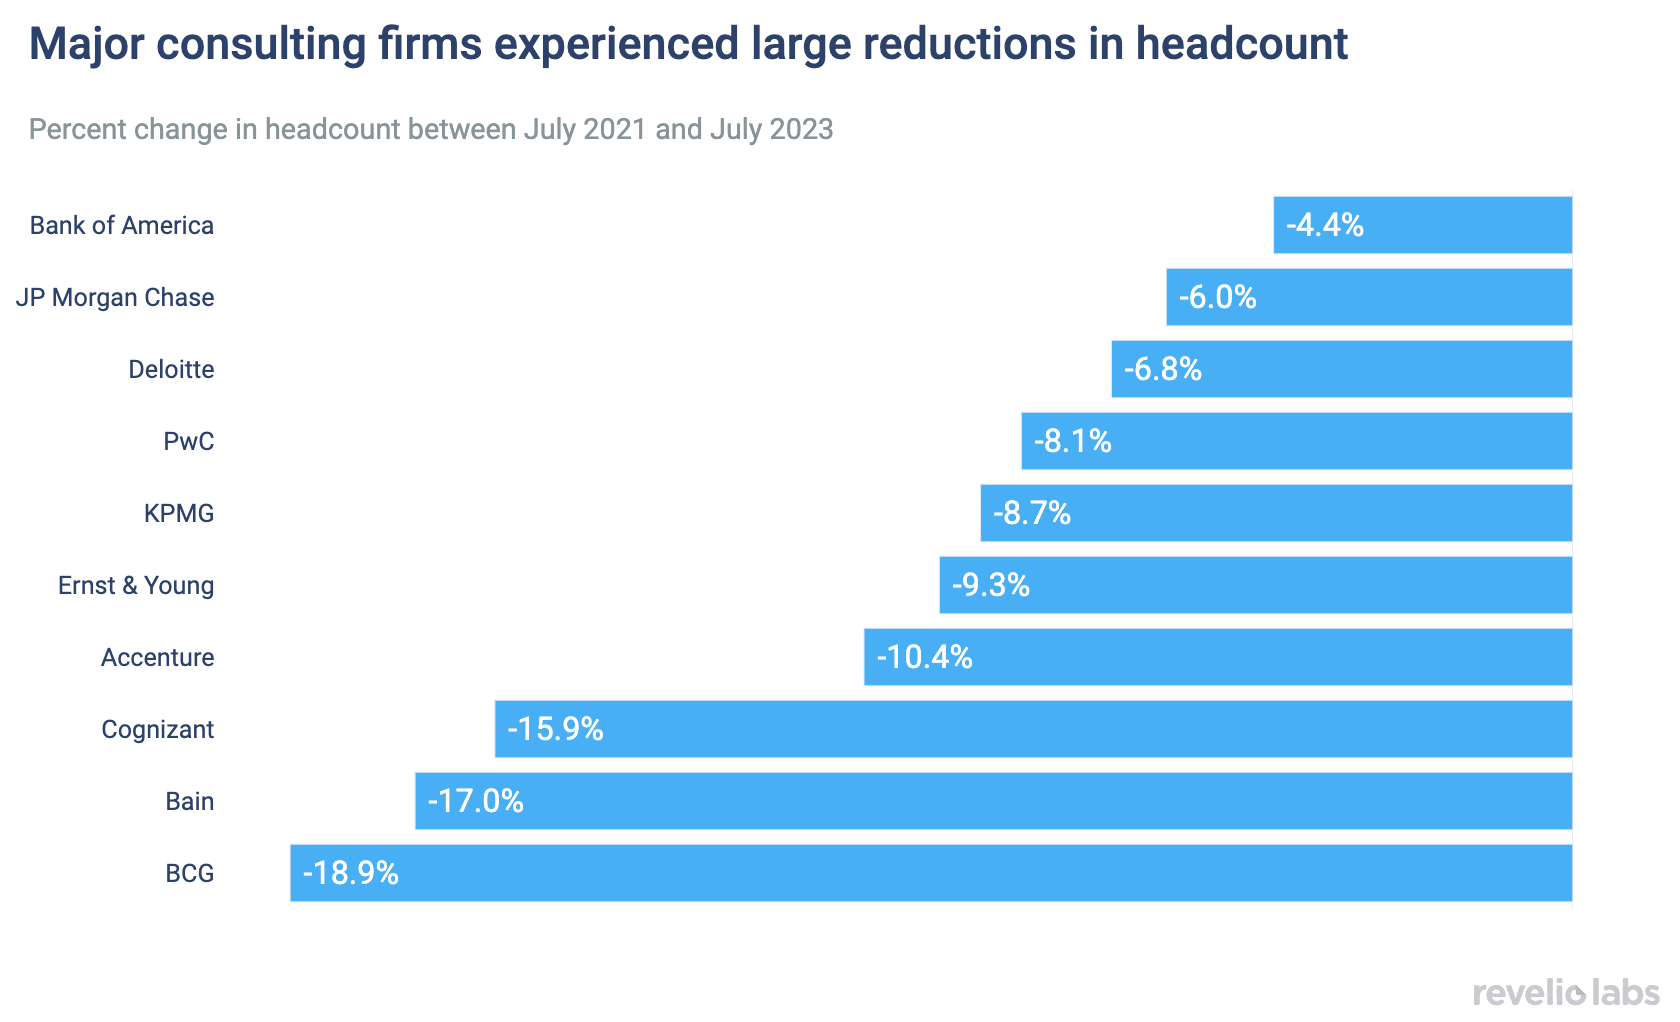 Big 4 consulting firms experienced large reductions in headcount